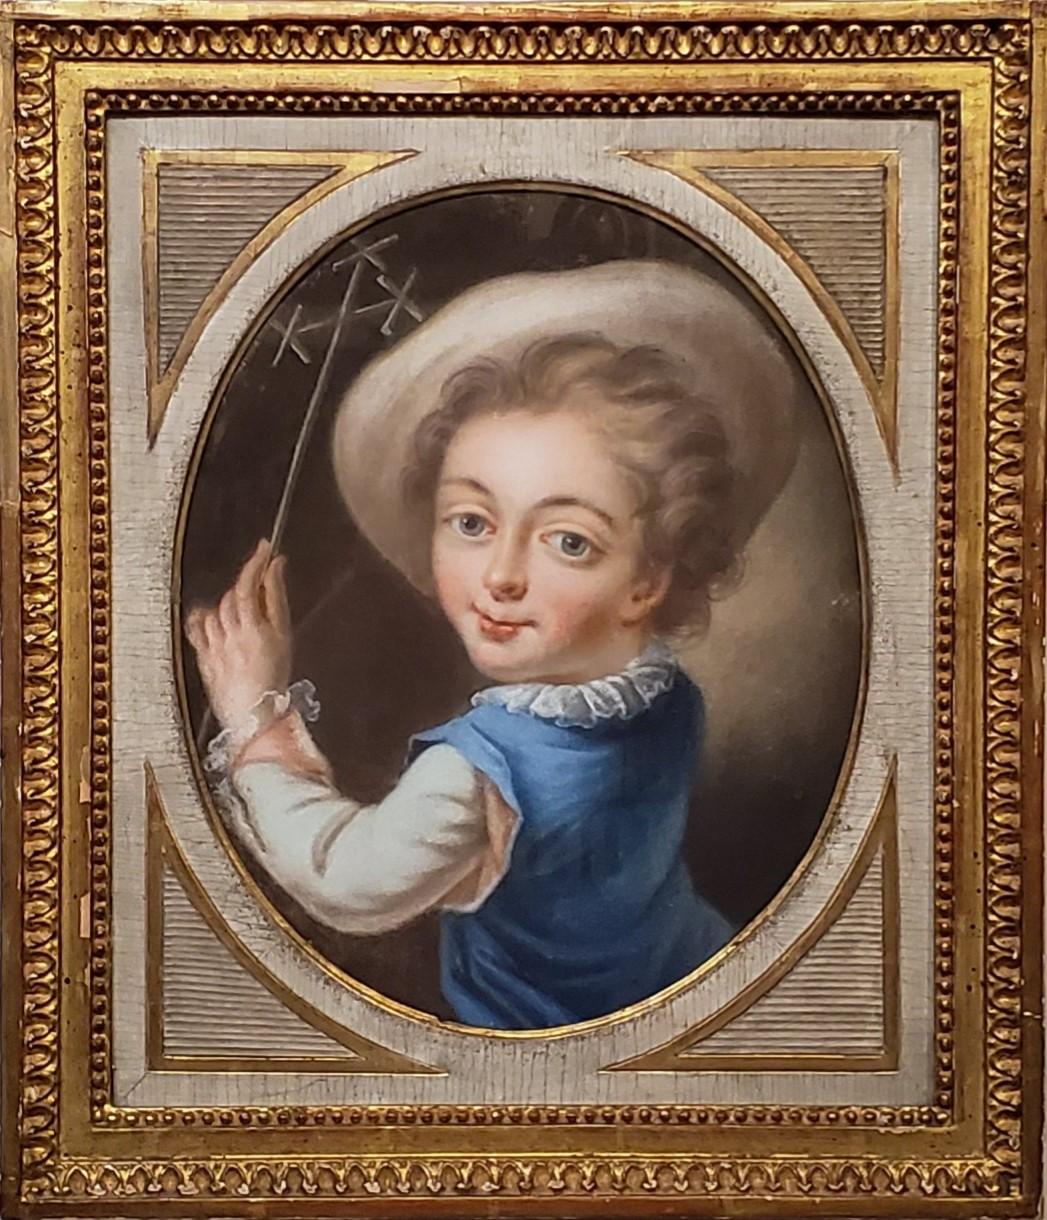 Unknown Portrait Painting - Portrait of a Boy is a French School 18th Century Pastel Painting